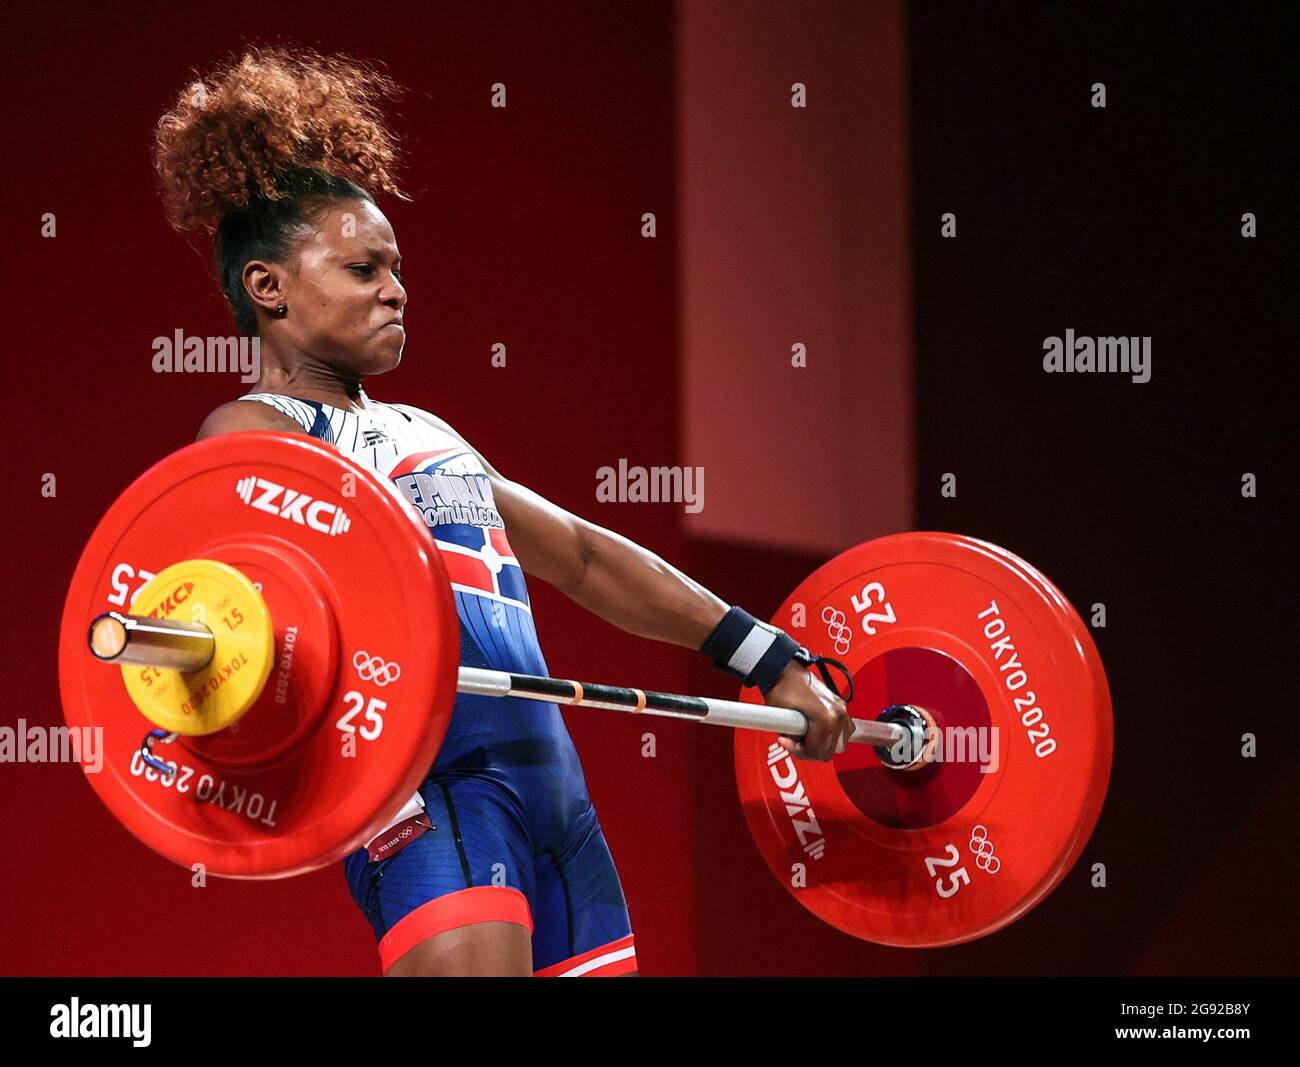 Tokyo, Japan. 24th July, 2021. Beatriz Elizabeth Piron Candelario of the Dominican Republic competes during the women's 49kg weightlifting event of the Tokyo 2020 Olympic Games in Tokyo, Japan, July 24, 2021. Credit: Yang Lei/Xinhua/Alamy Live News Stock Photo